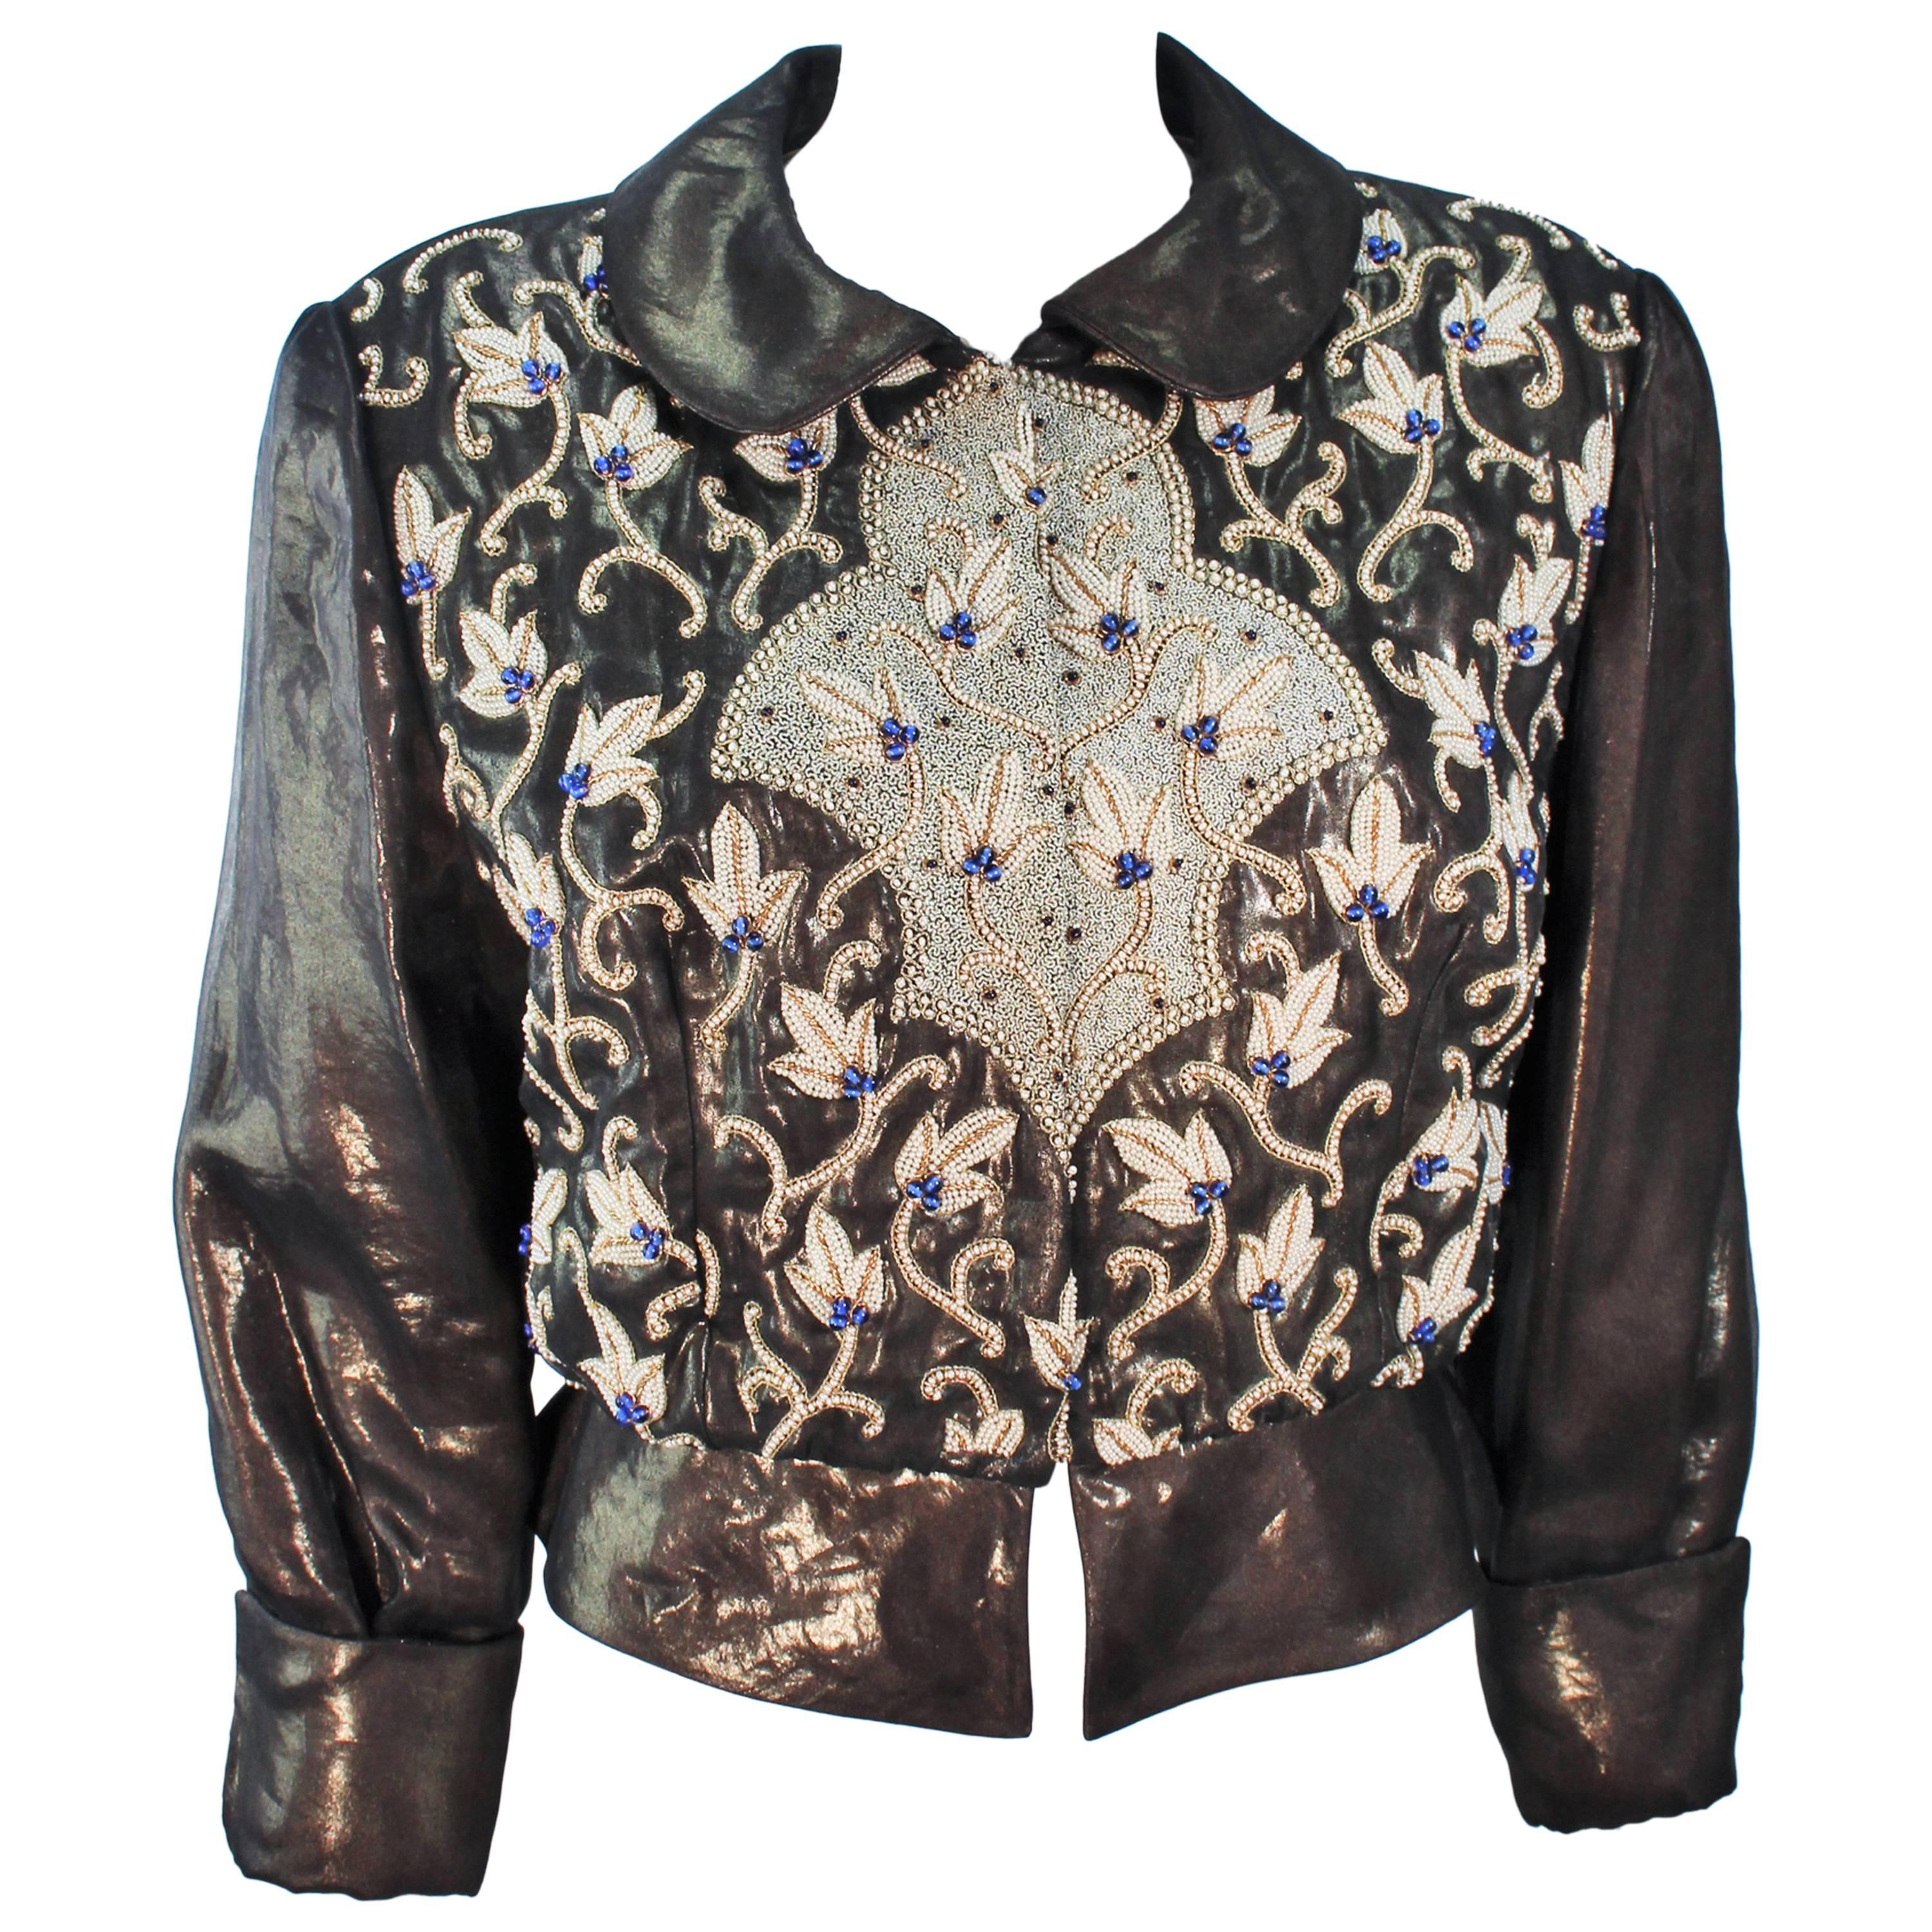 GIORGIO ARMANI Bronze Jacket with Bead Applique and Embroidery Size 44 10